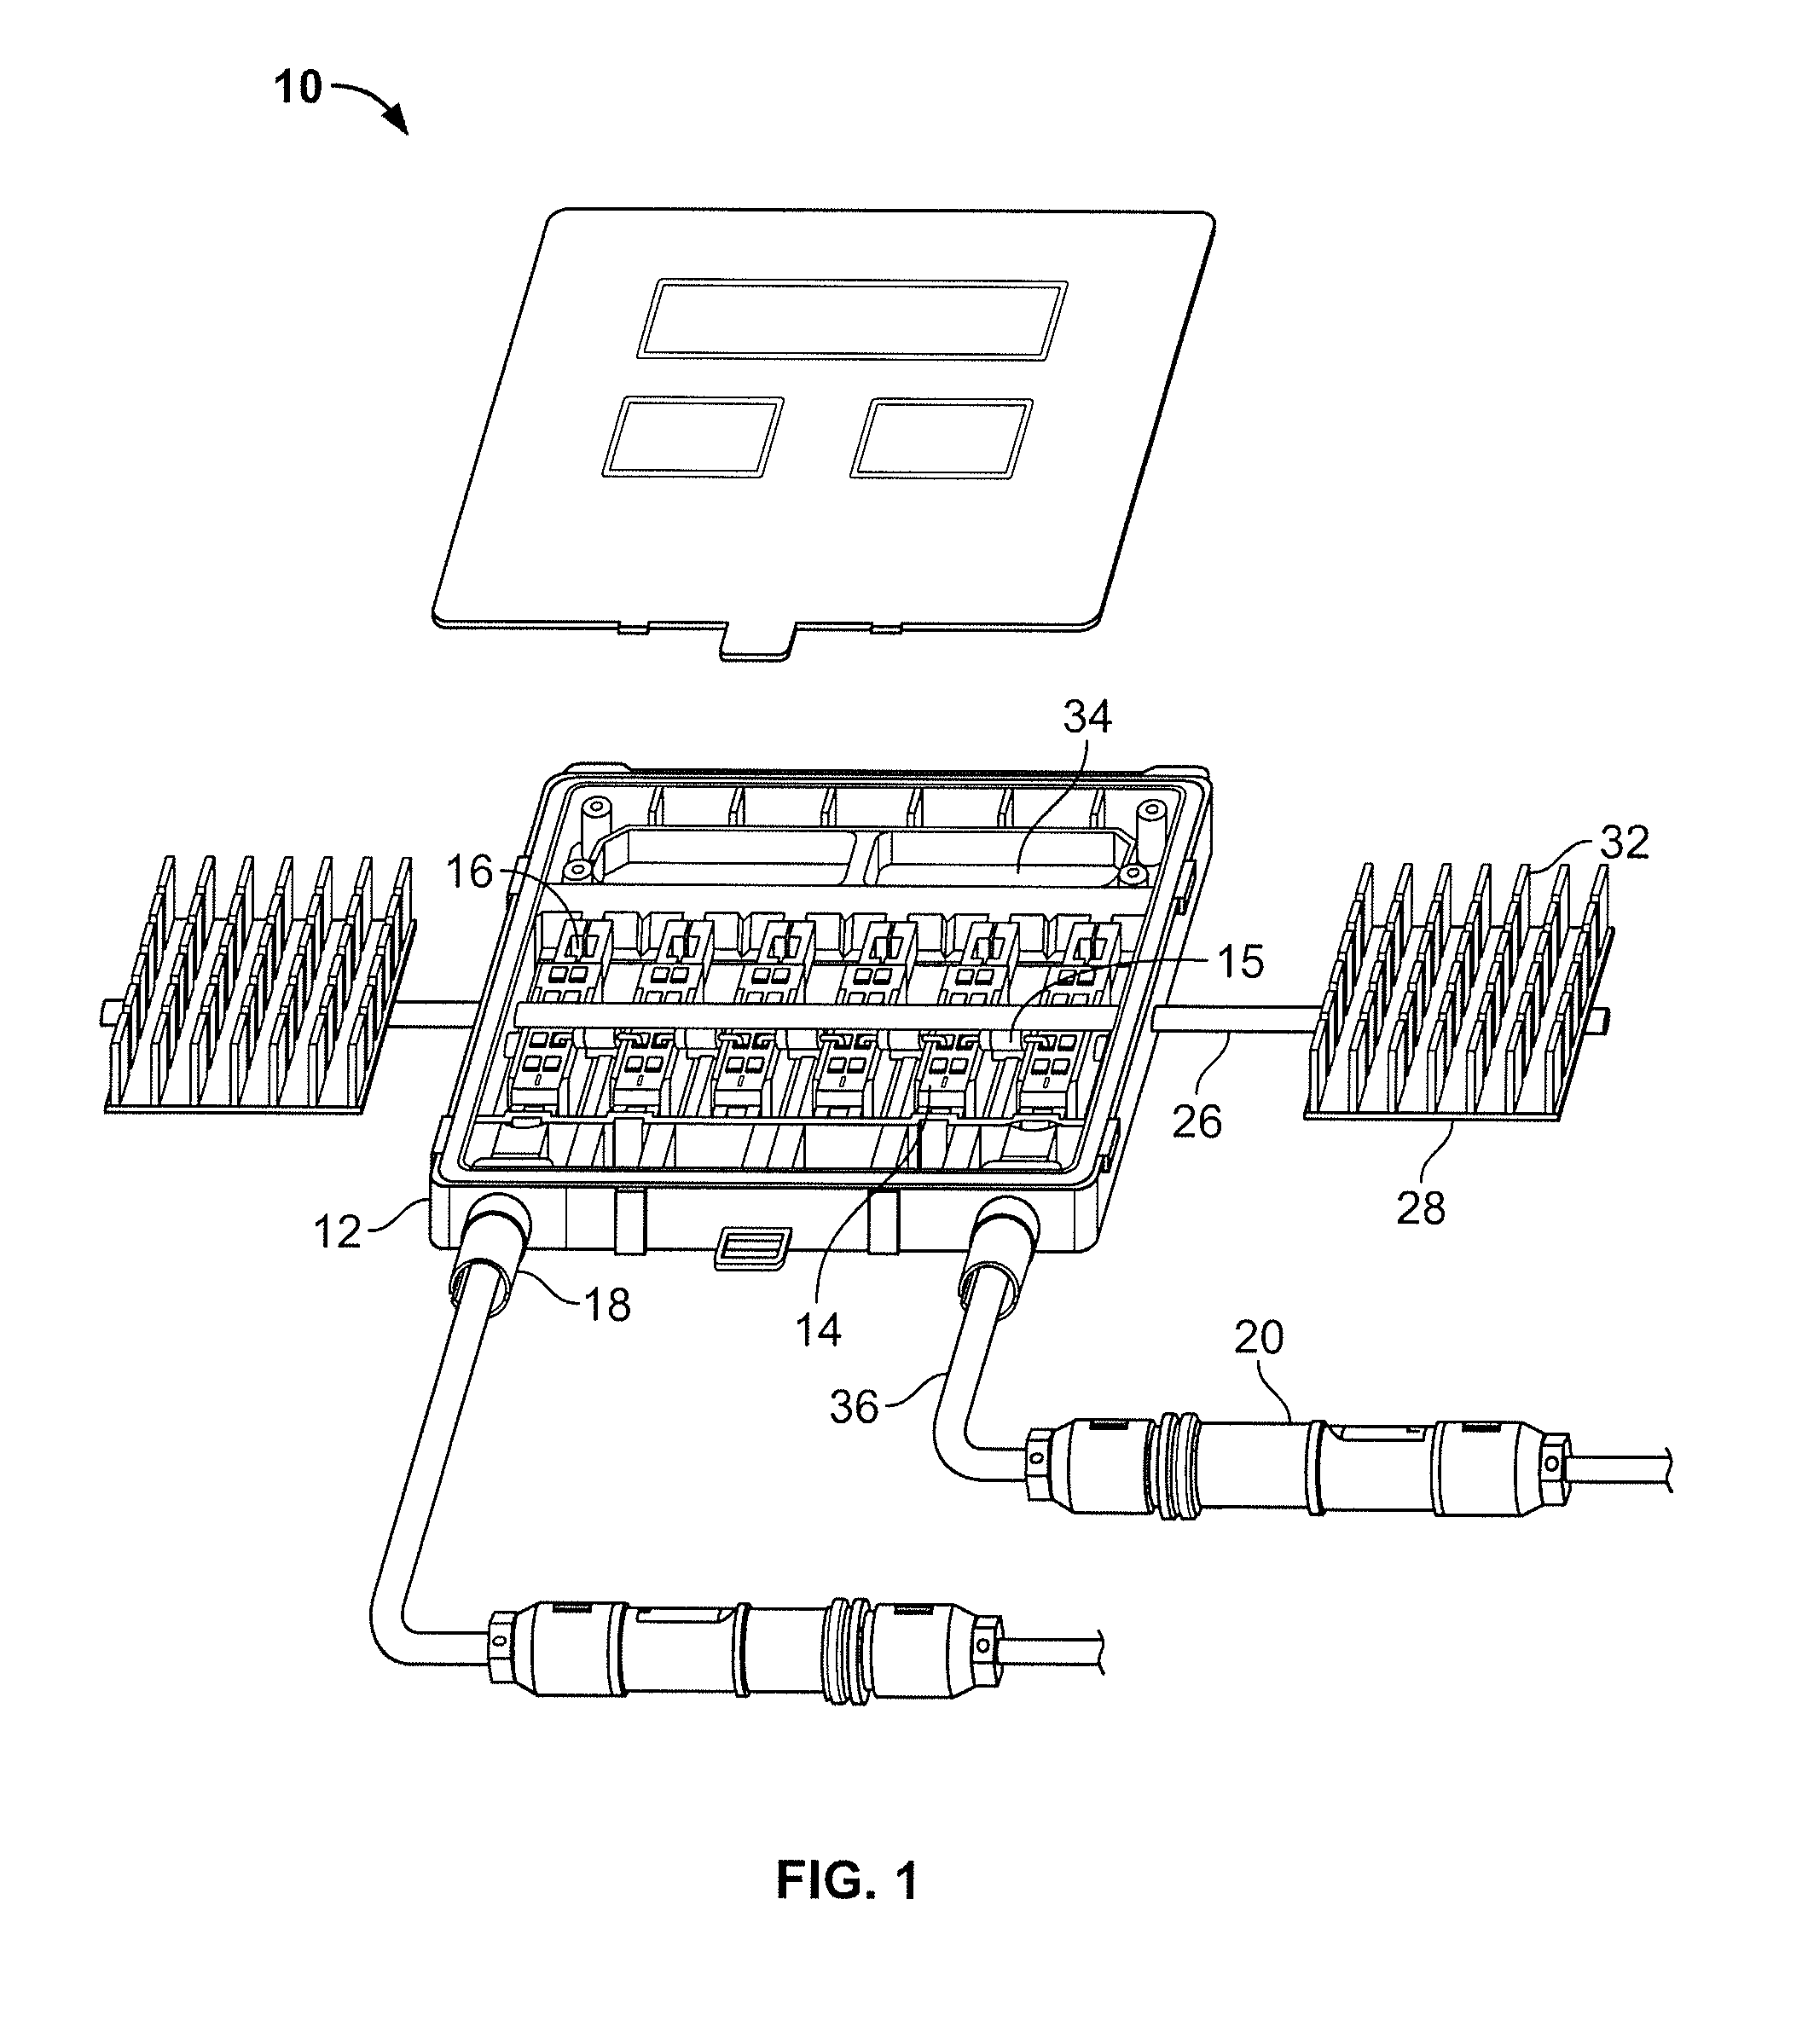 Heat dissipation system for solarlok photovoltaic interconnection system